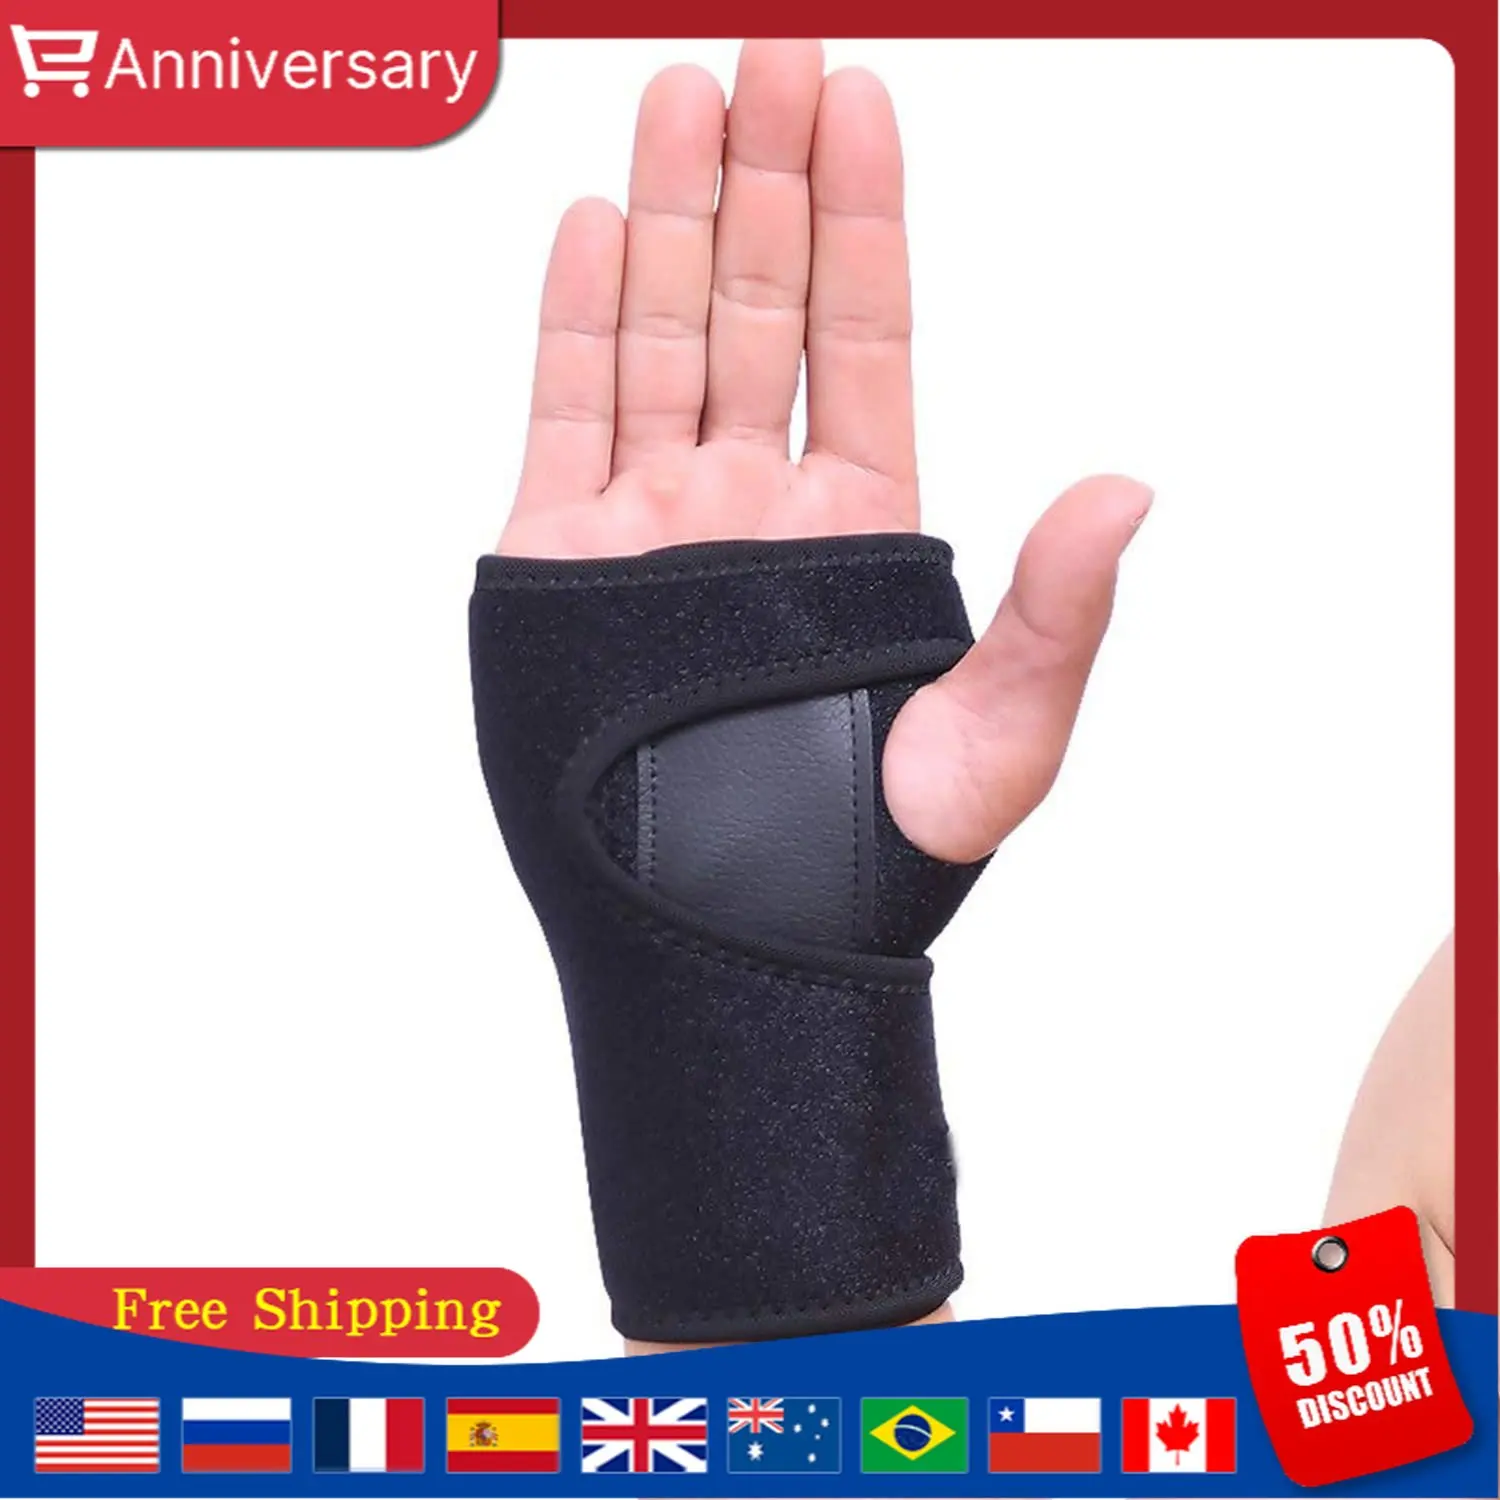 Carpal Tunnel Wrist Splint Support Wrist Brace Joint Pain Relief Repetitive Strain Injury Adjustable Hand Guard for Men Women